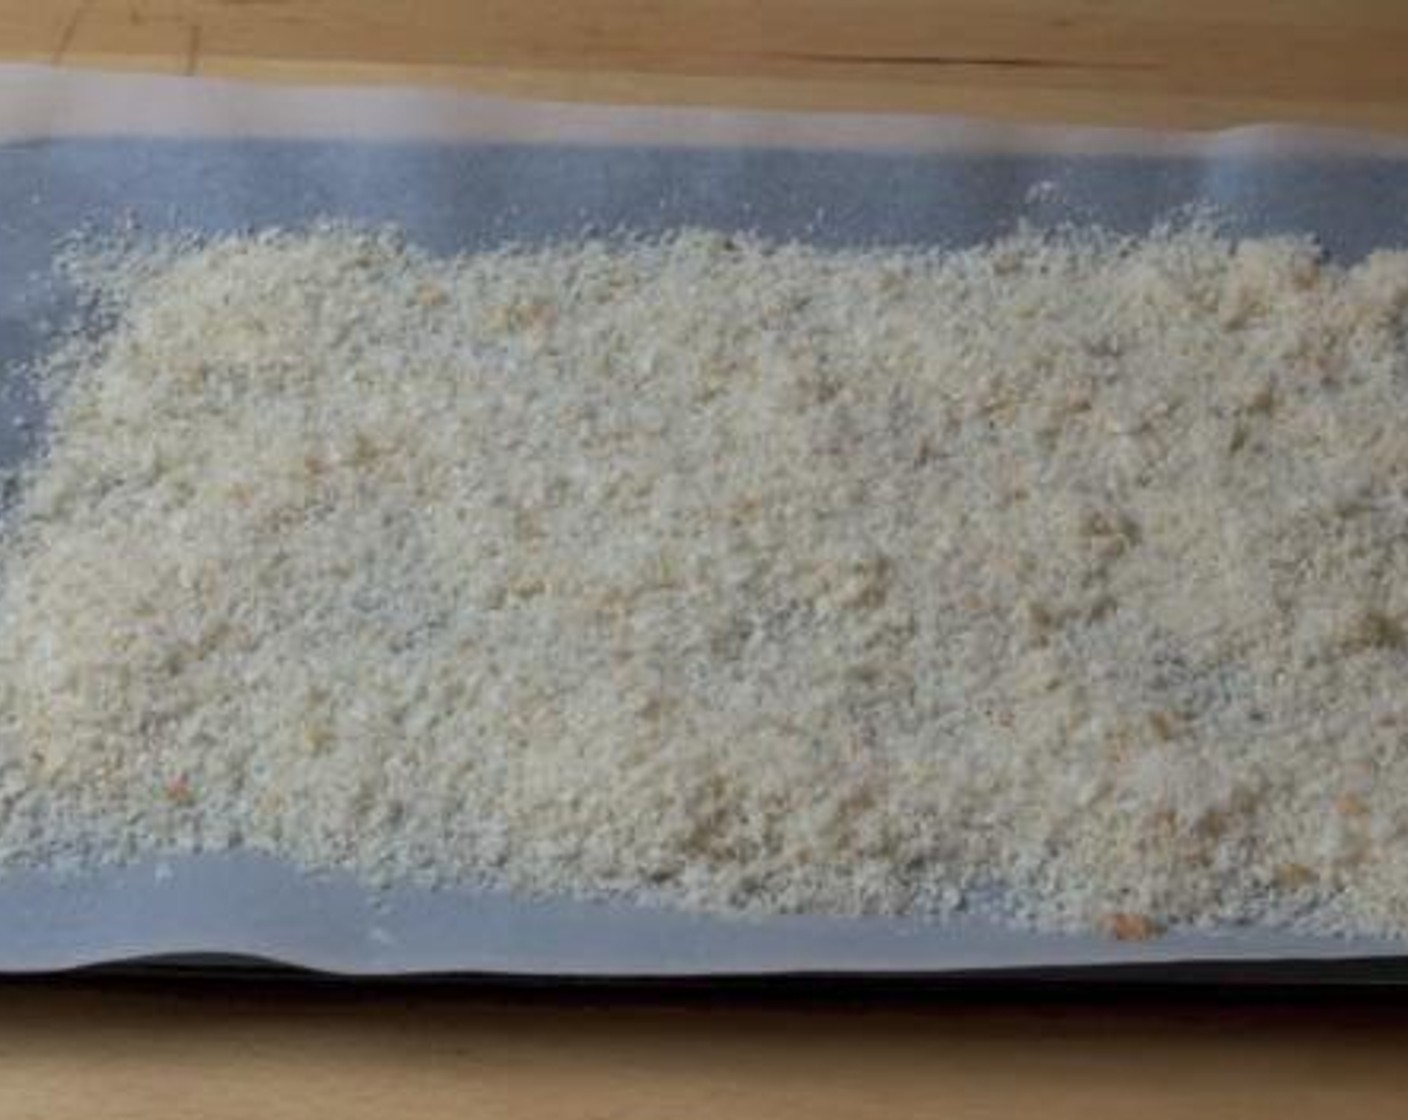 step 2 To make the dry bread crumbs, toast your fresh bread crumbs inside until they are dried out!